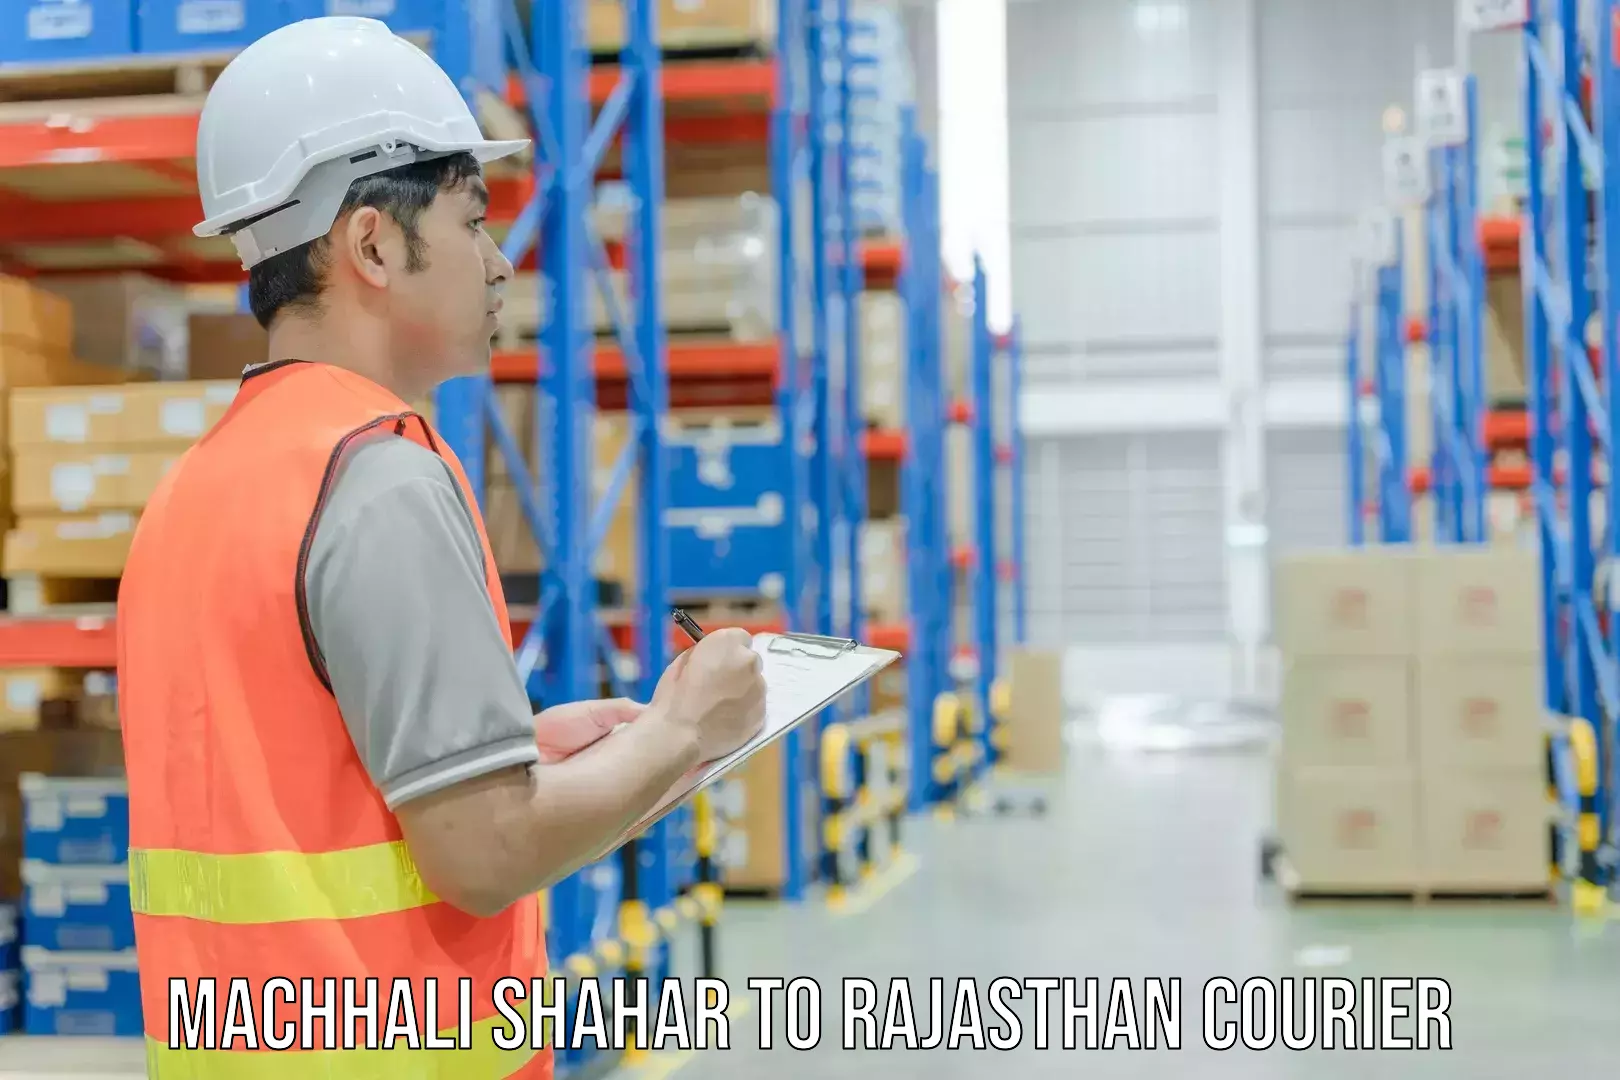 Premium delivery services Machhali Shahar to Rajasthan